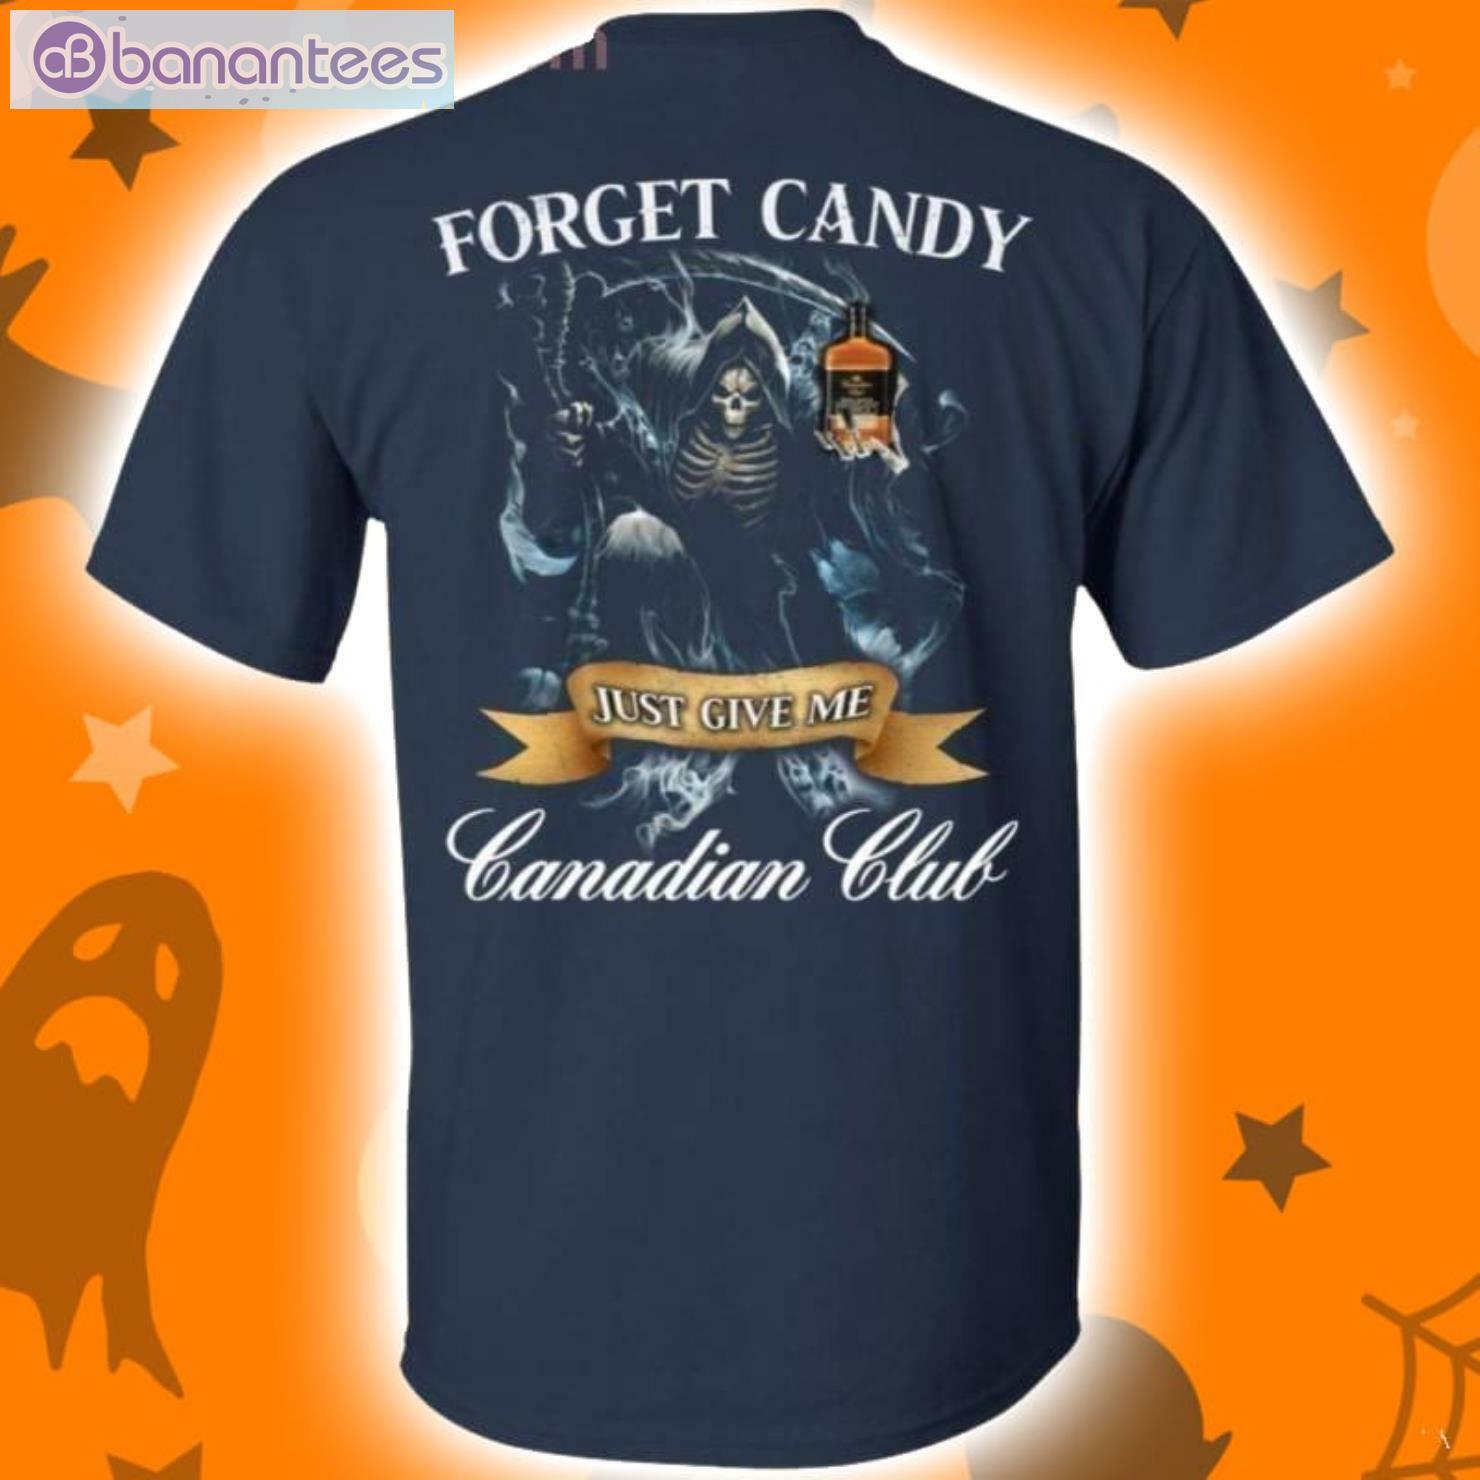 Forget Candy Just Give Me Canadian Club Whiskey Halloween T-Shirt Product Photo 2 Product photo 2